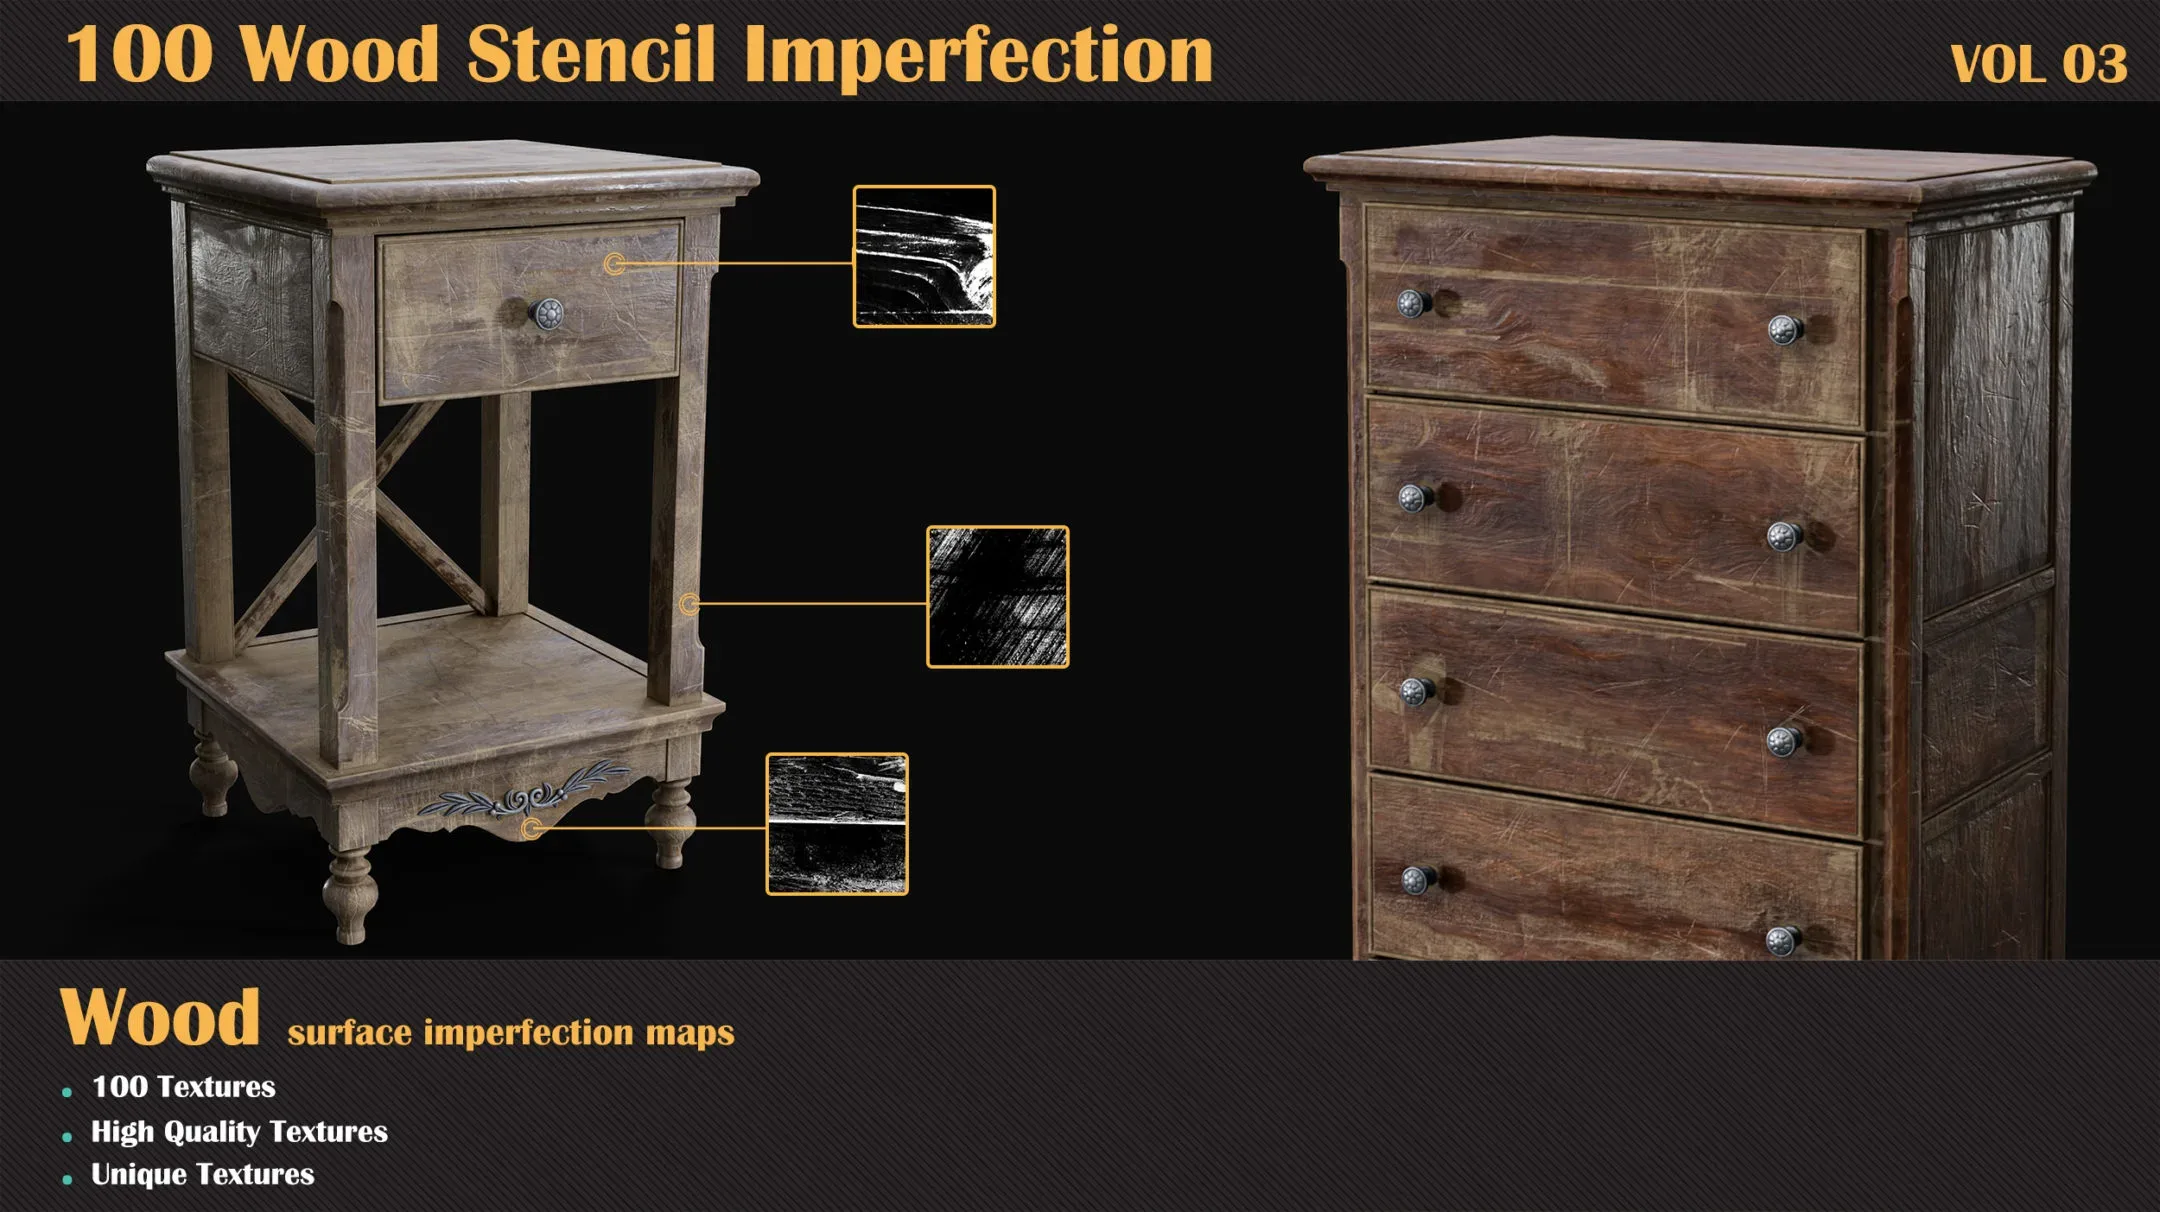 100 Wood Stencil Imperfection - VOL 03